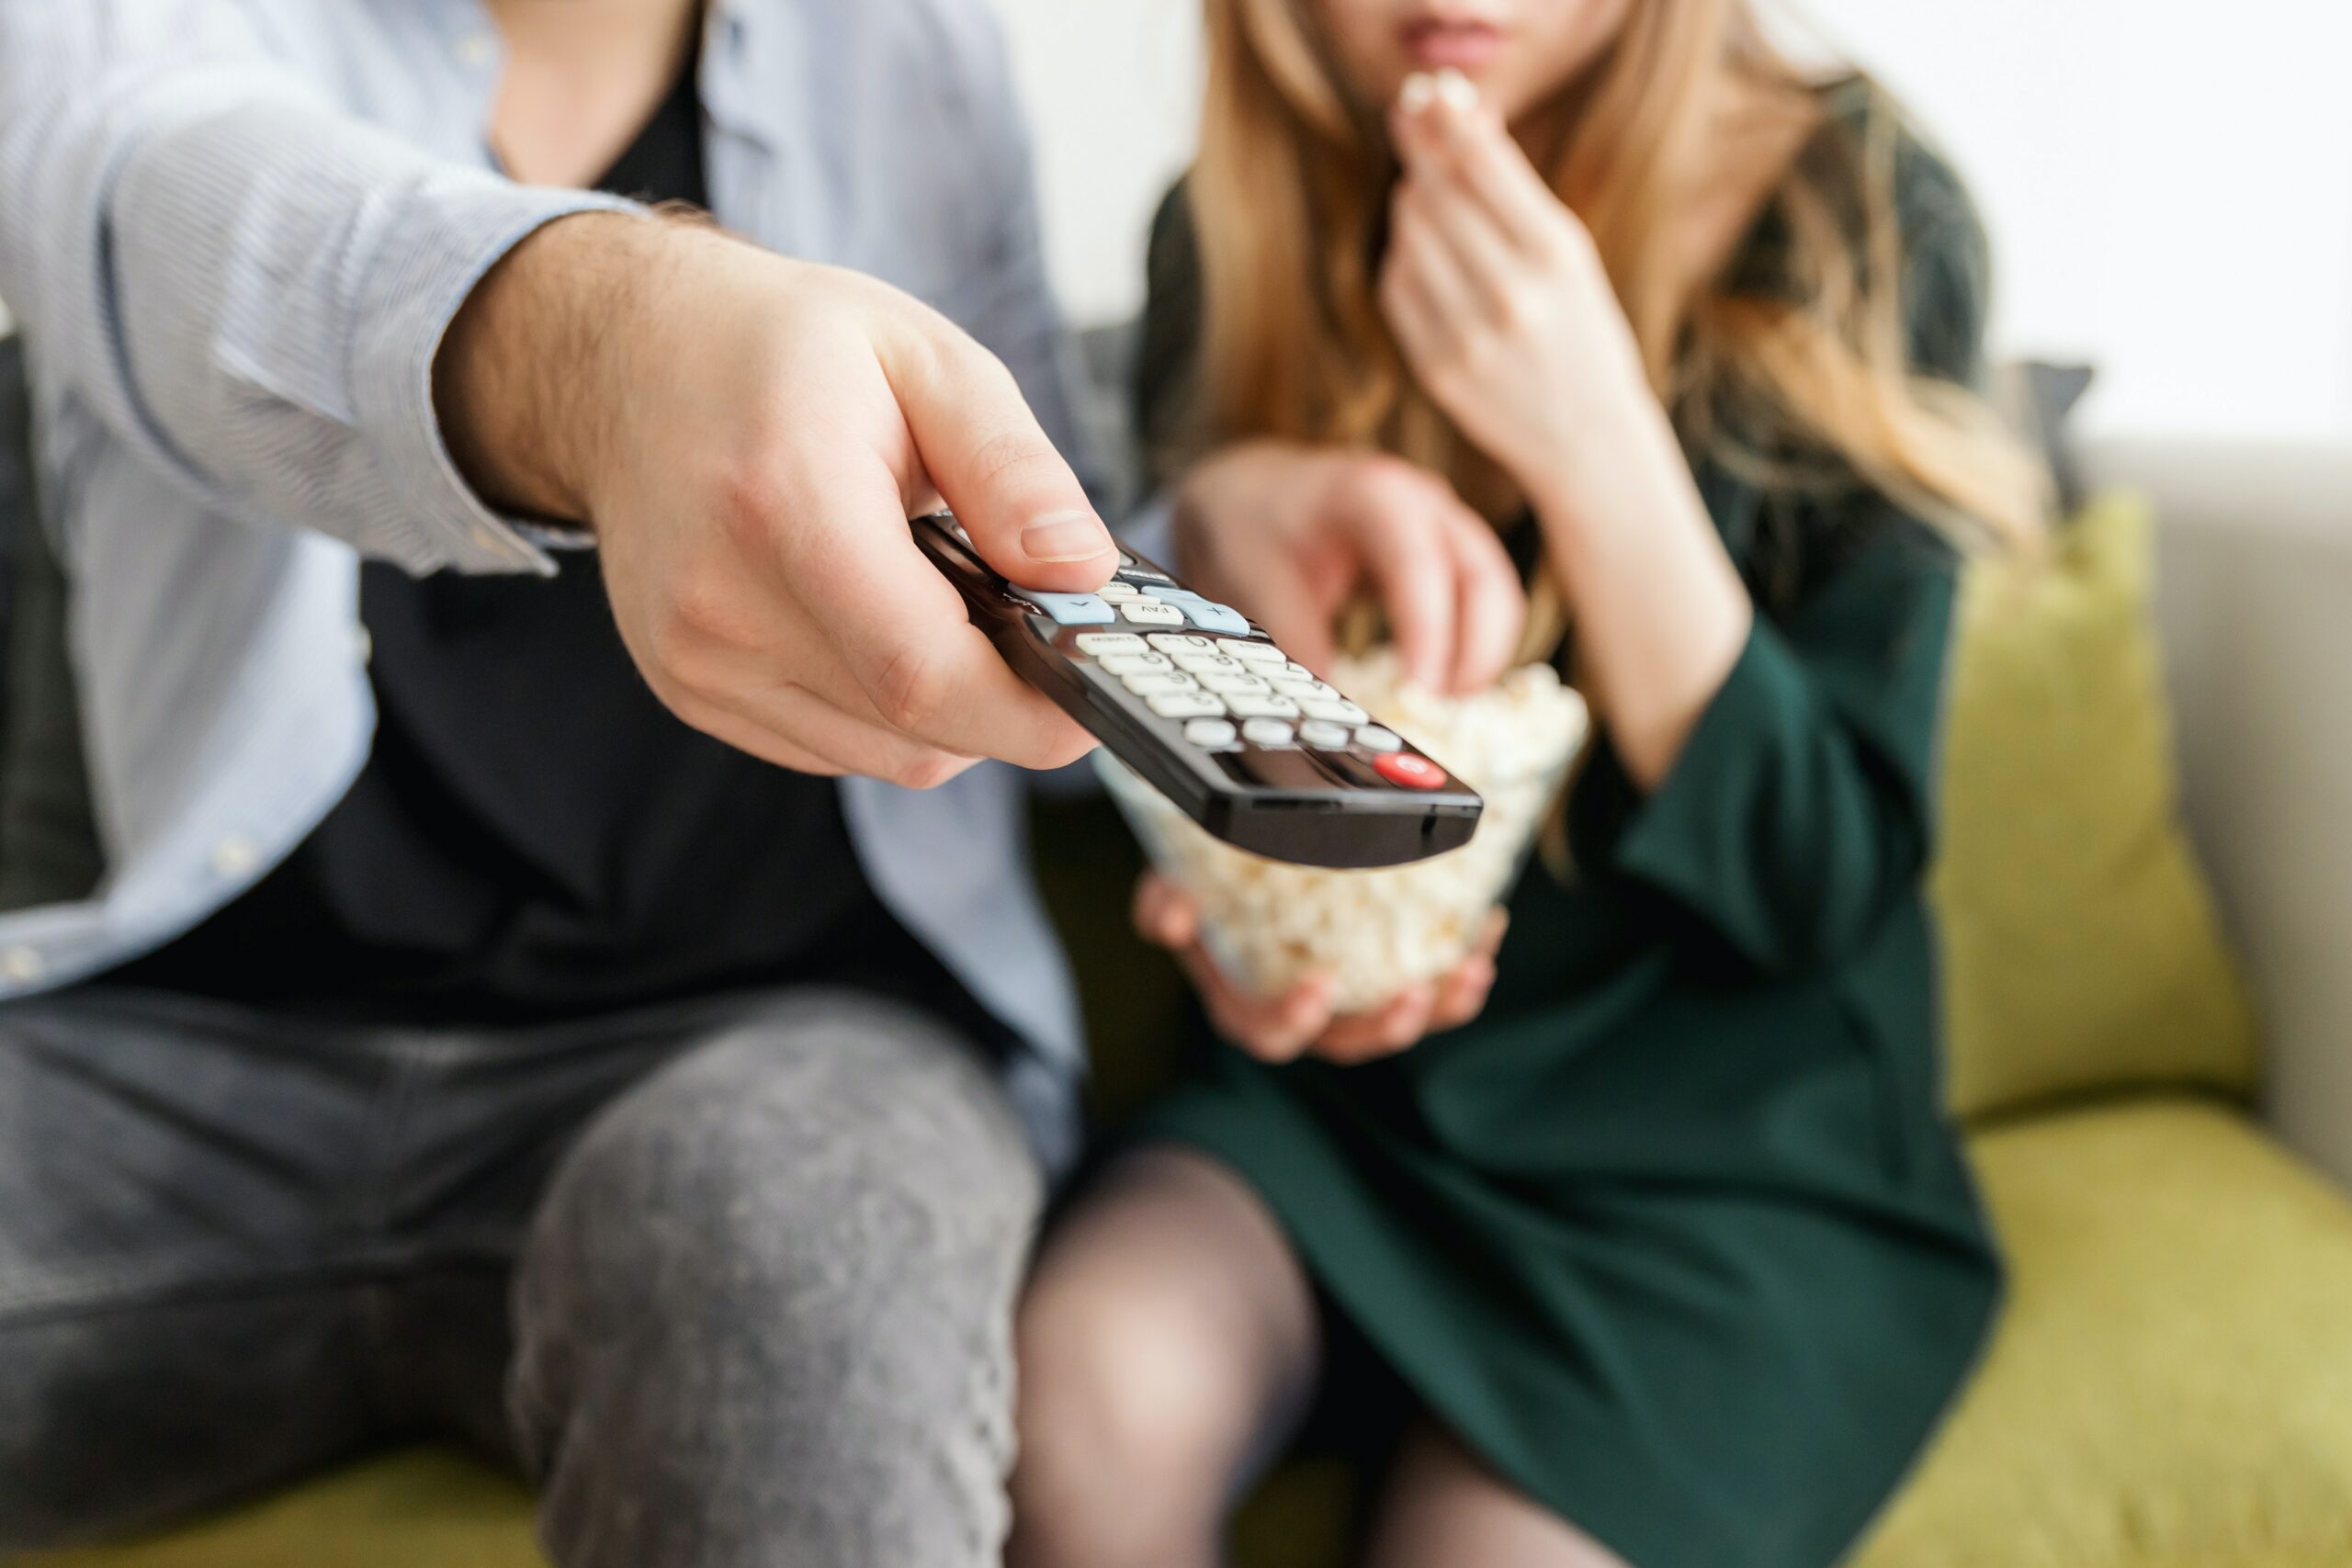 Universal TV Remote Benefits scaled